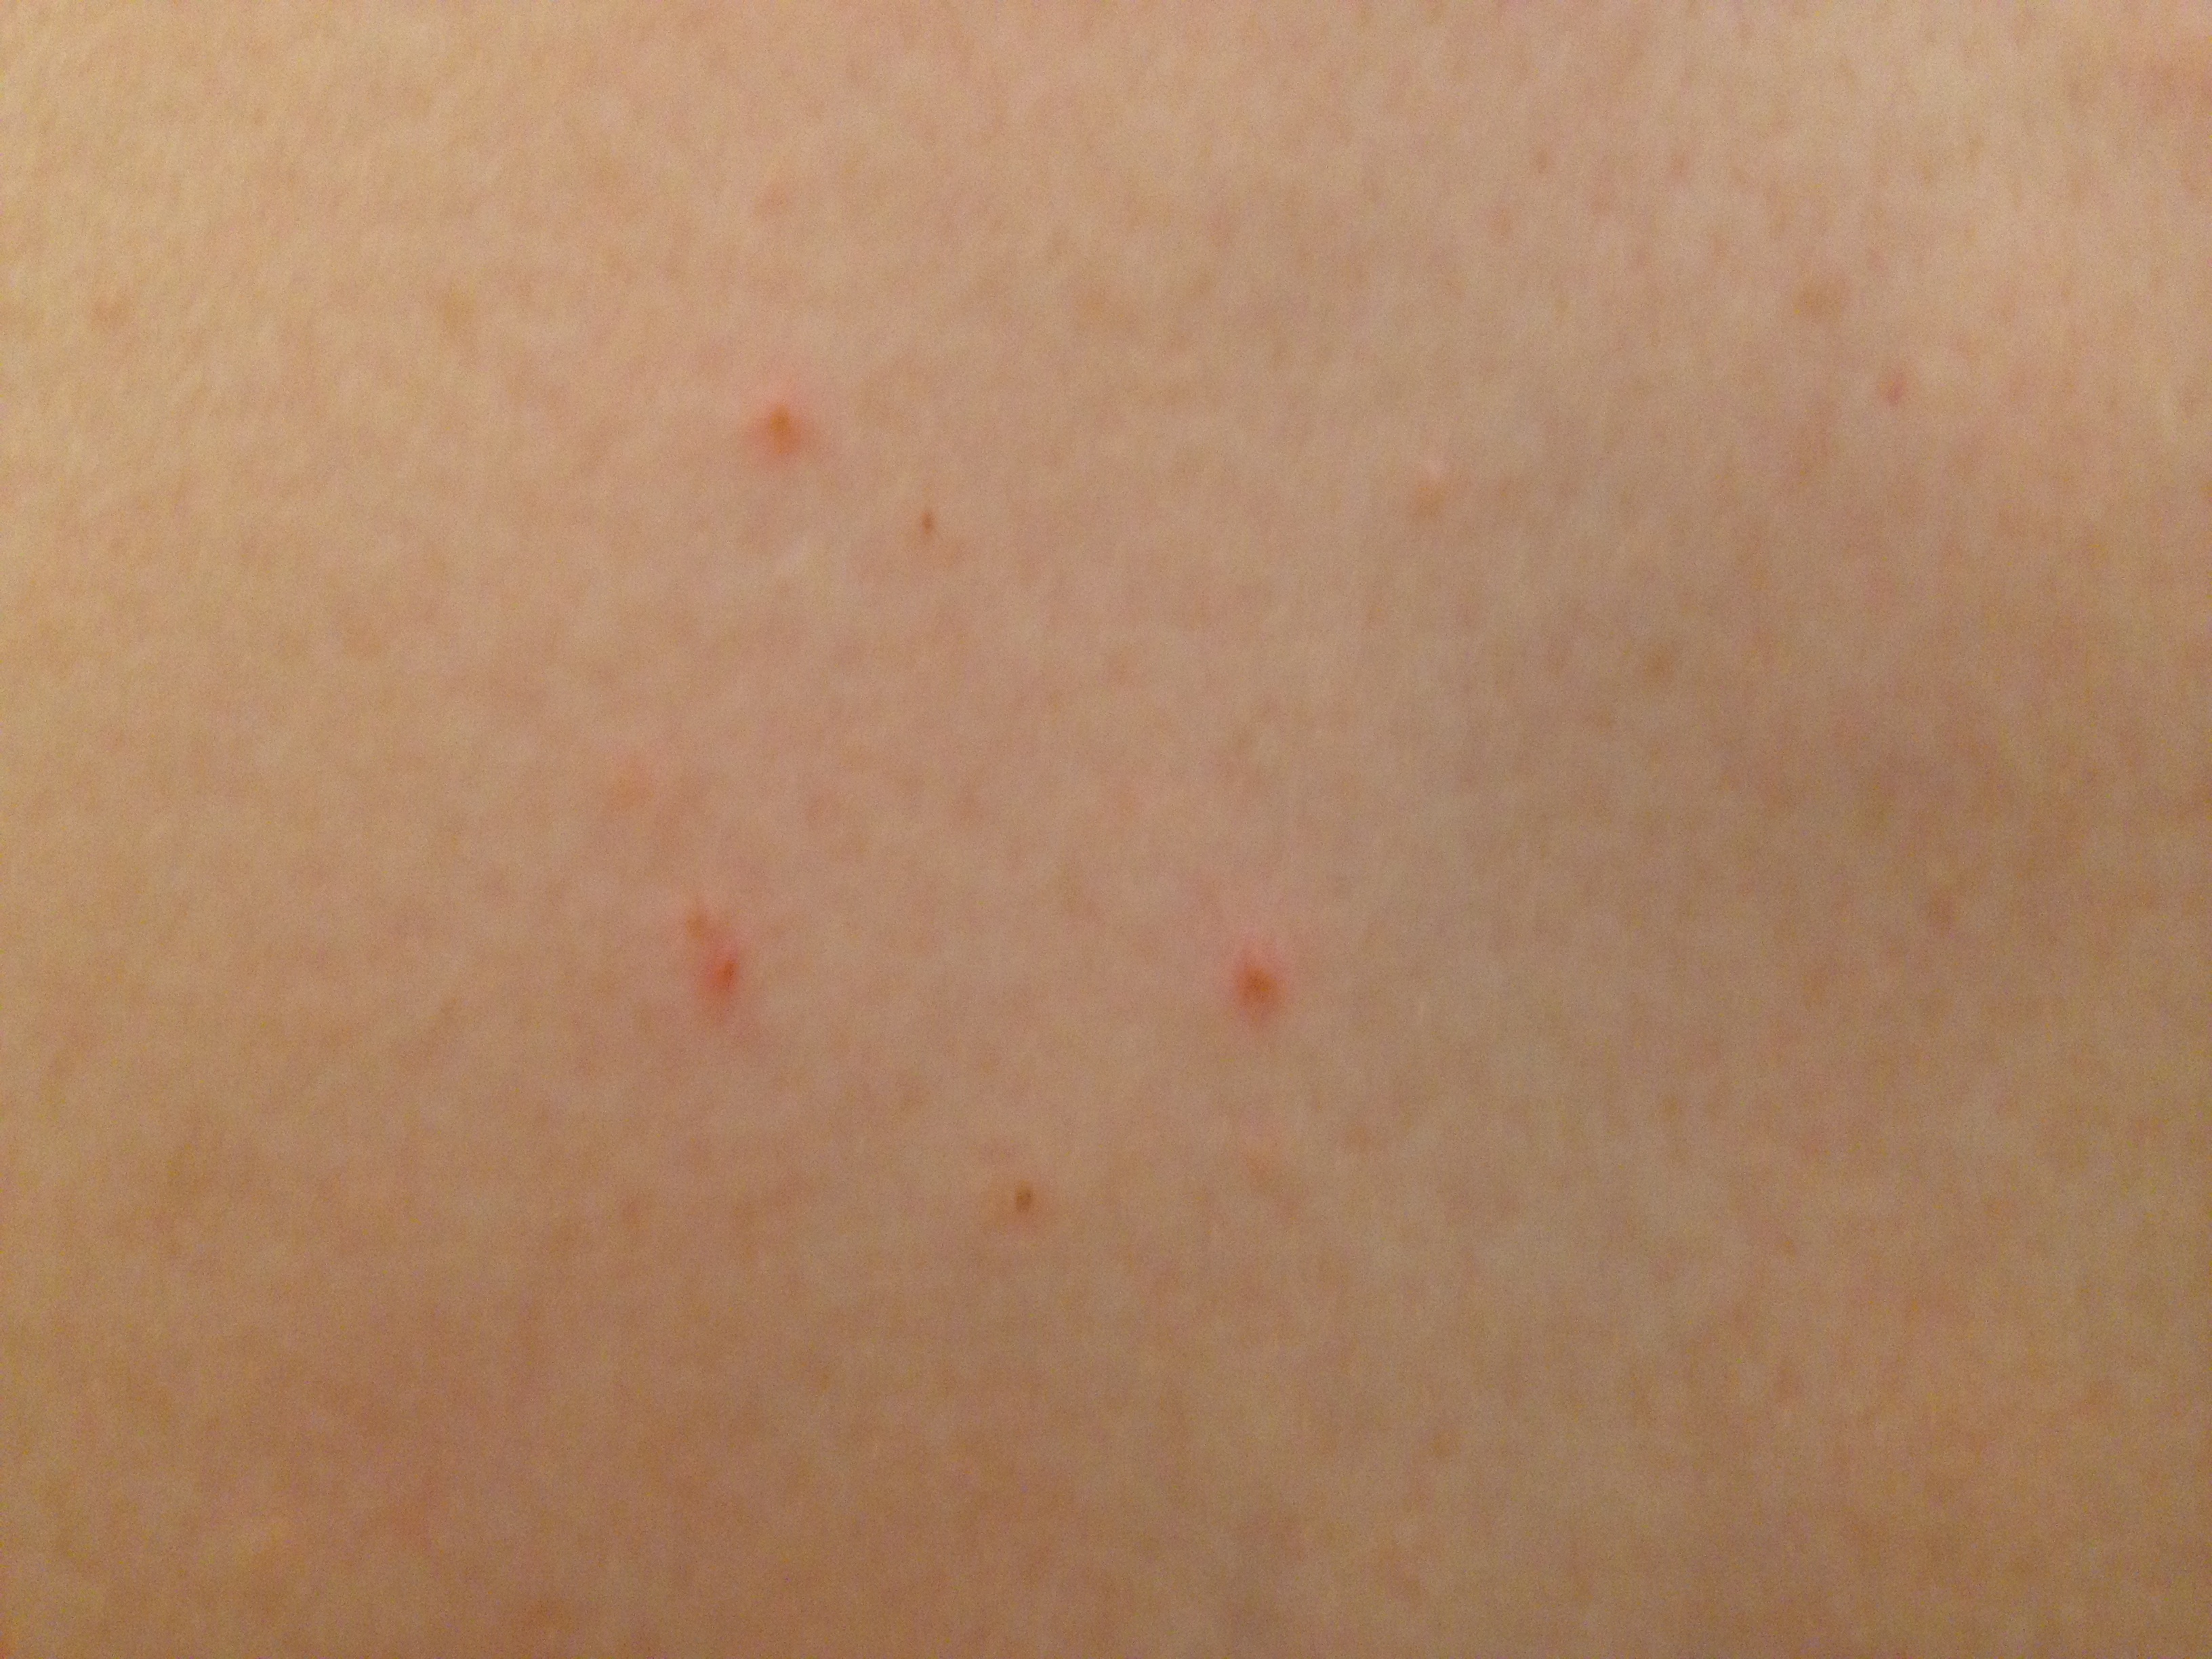 Bug Bites Little Red Dots All Information About Healthy Recipes And Cooking Tips